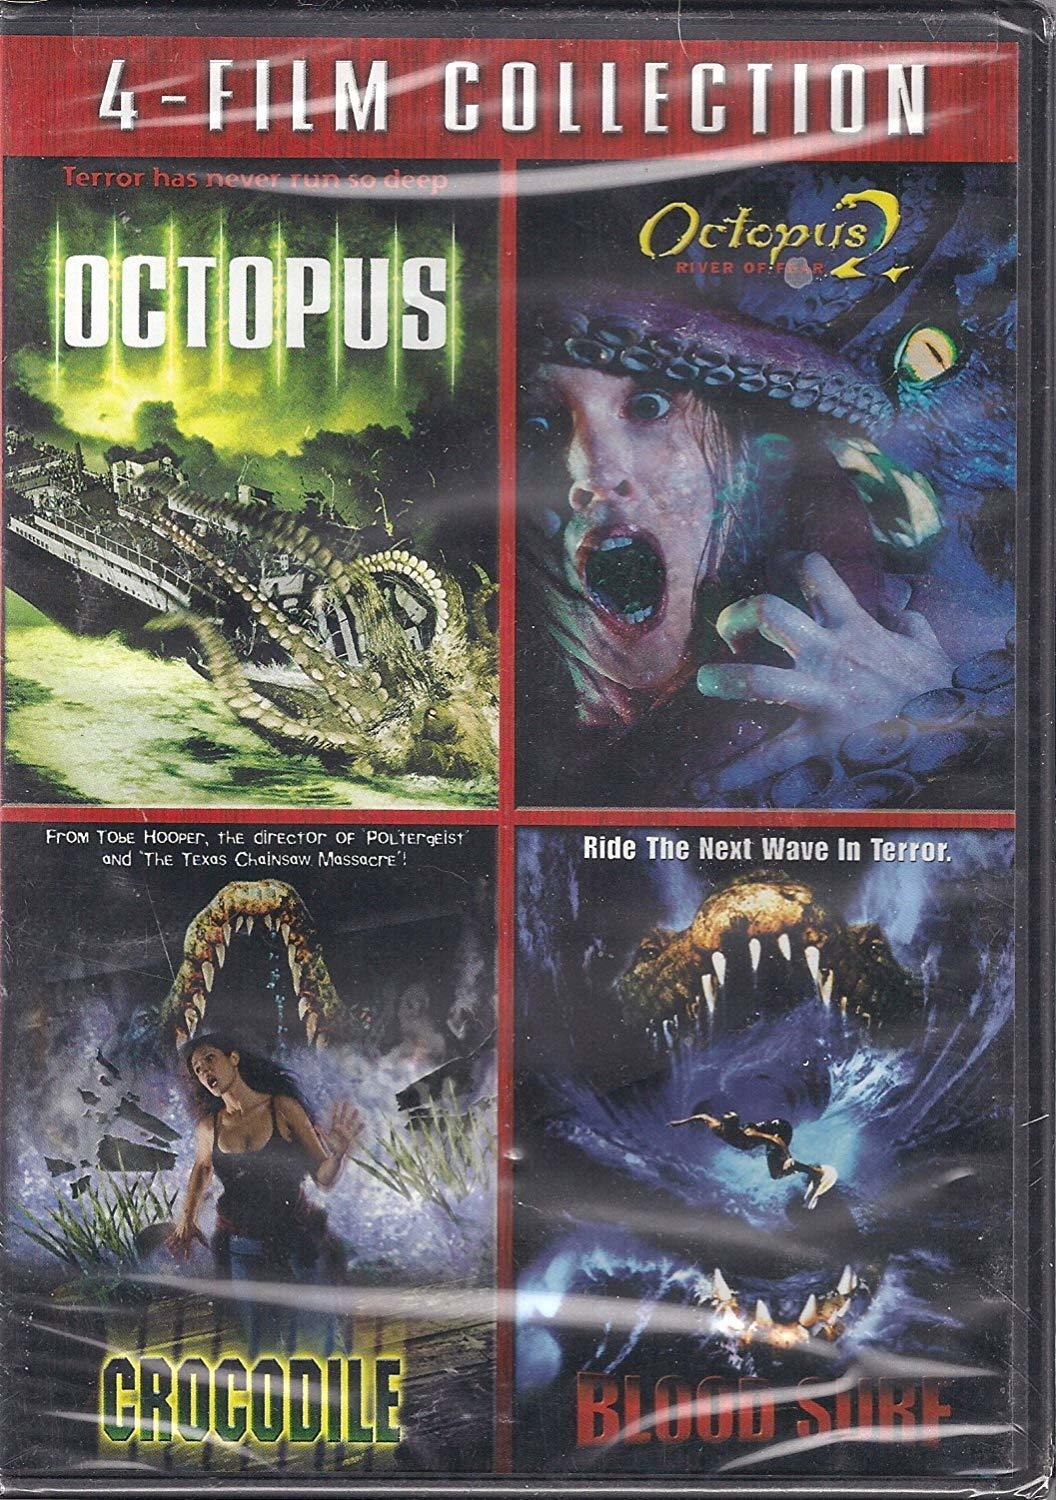 4-Film Collection DVD (Octopus / Octopus 2: River of Fear / Crocodile /  Blood Surf)